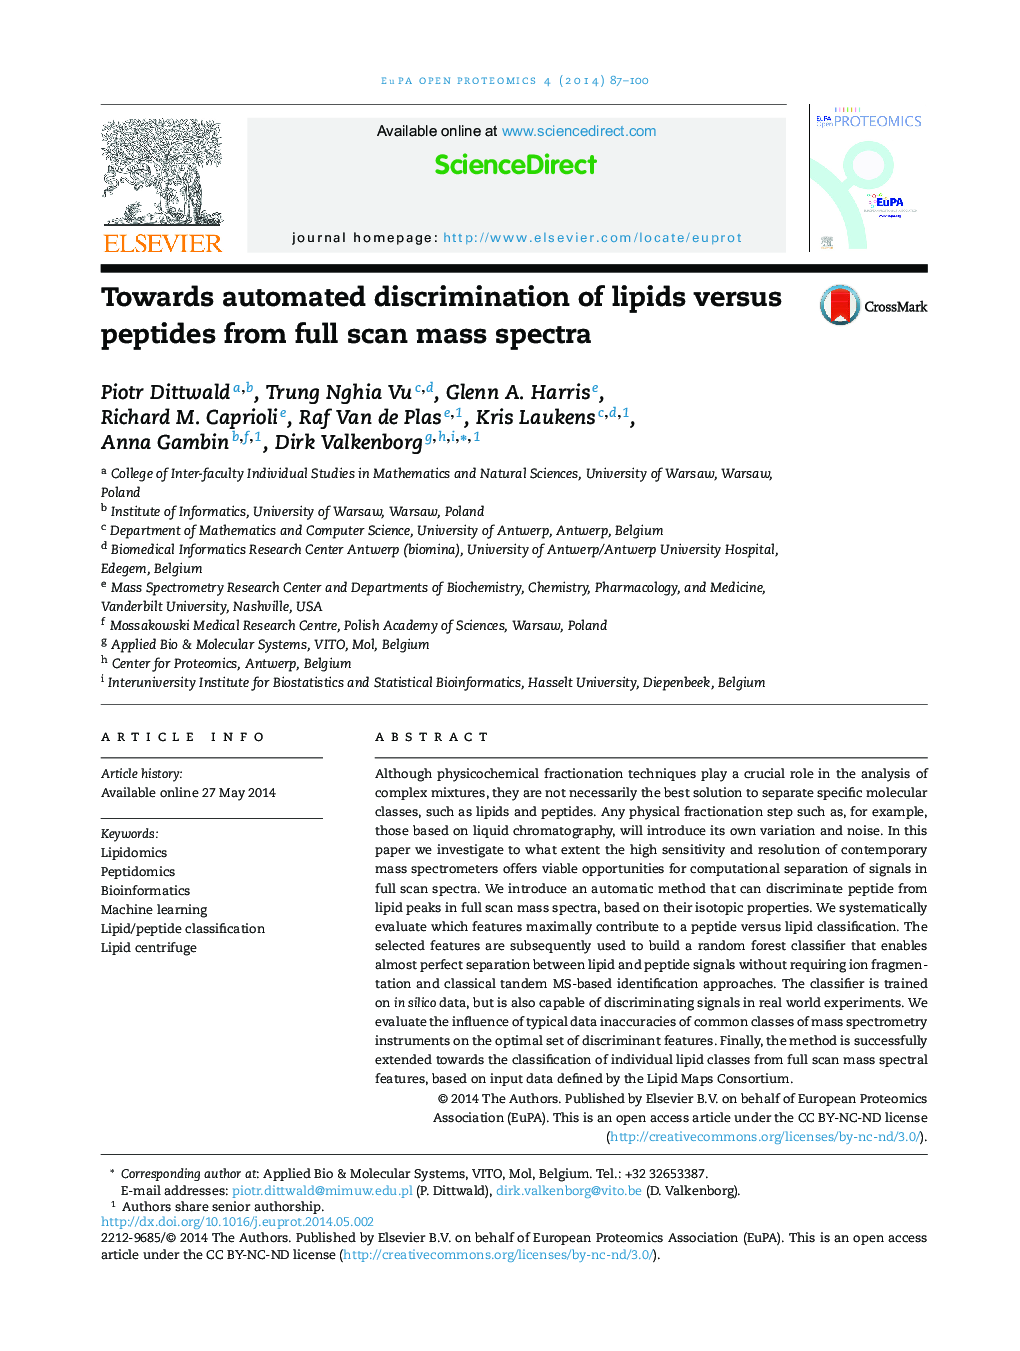 Towards automated discrimination of lipids versus peptides from full scan mass spectra